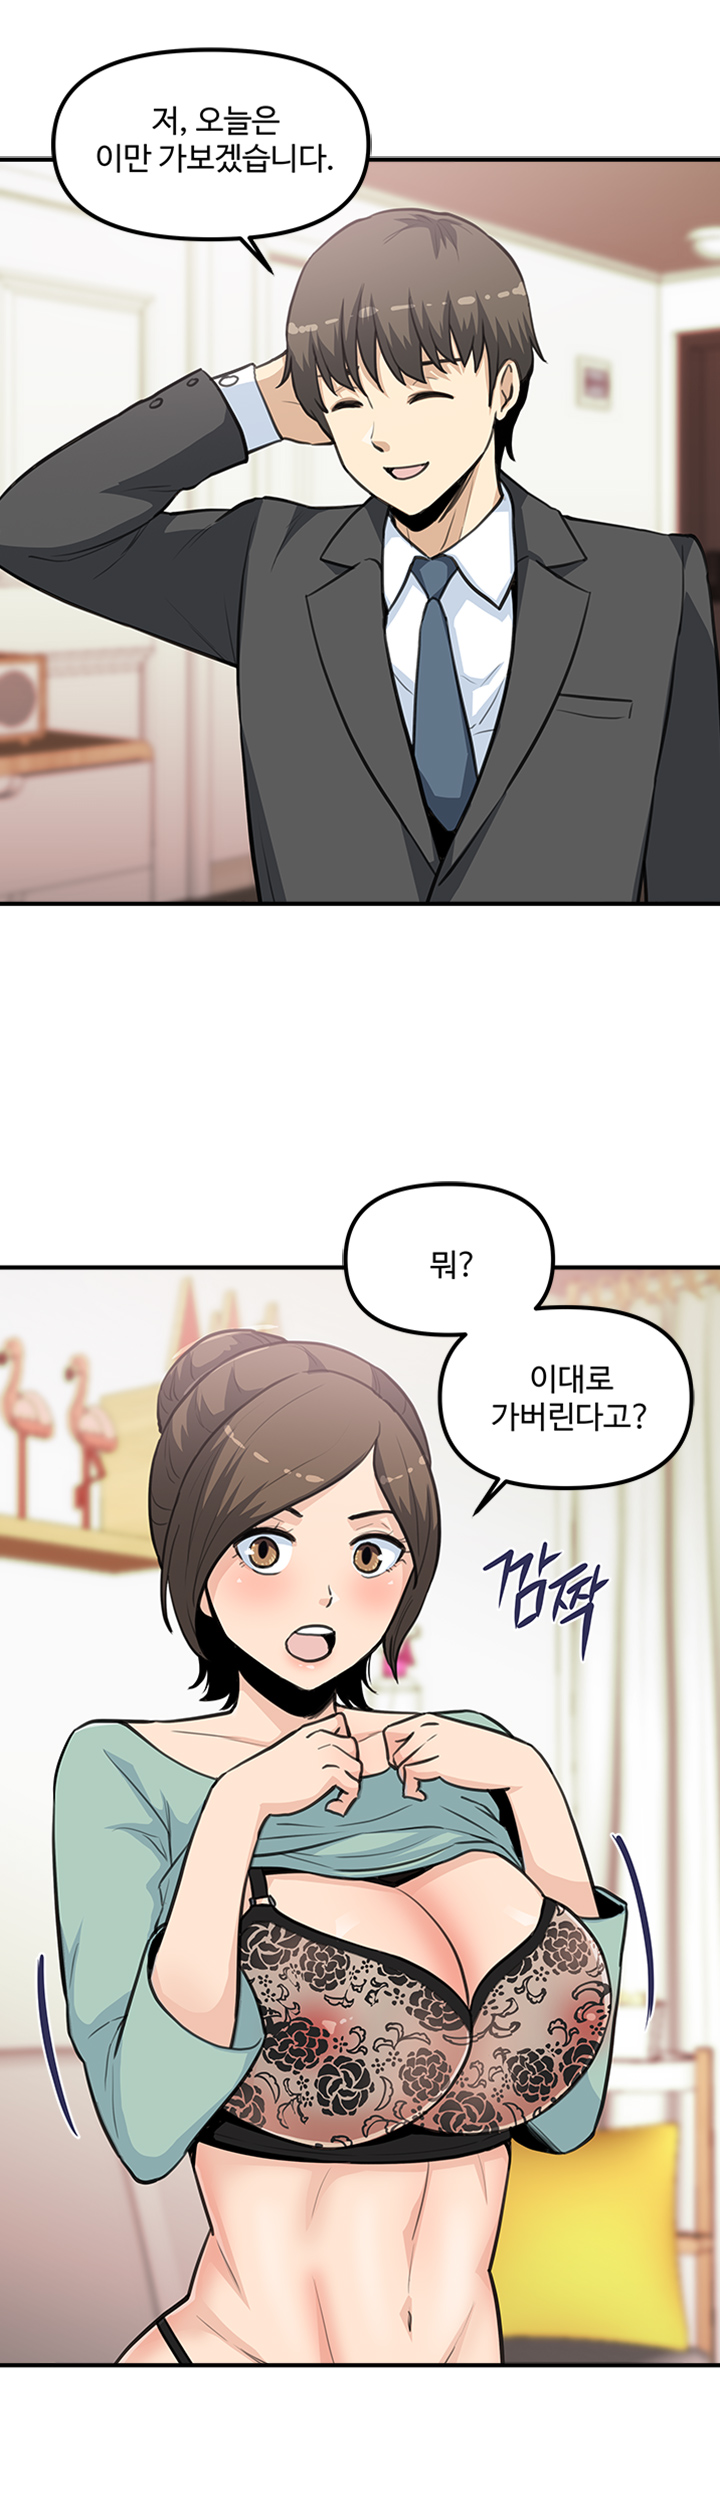 Office Bible Raw - Chapter 21 Page 7